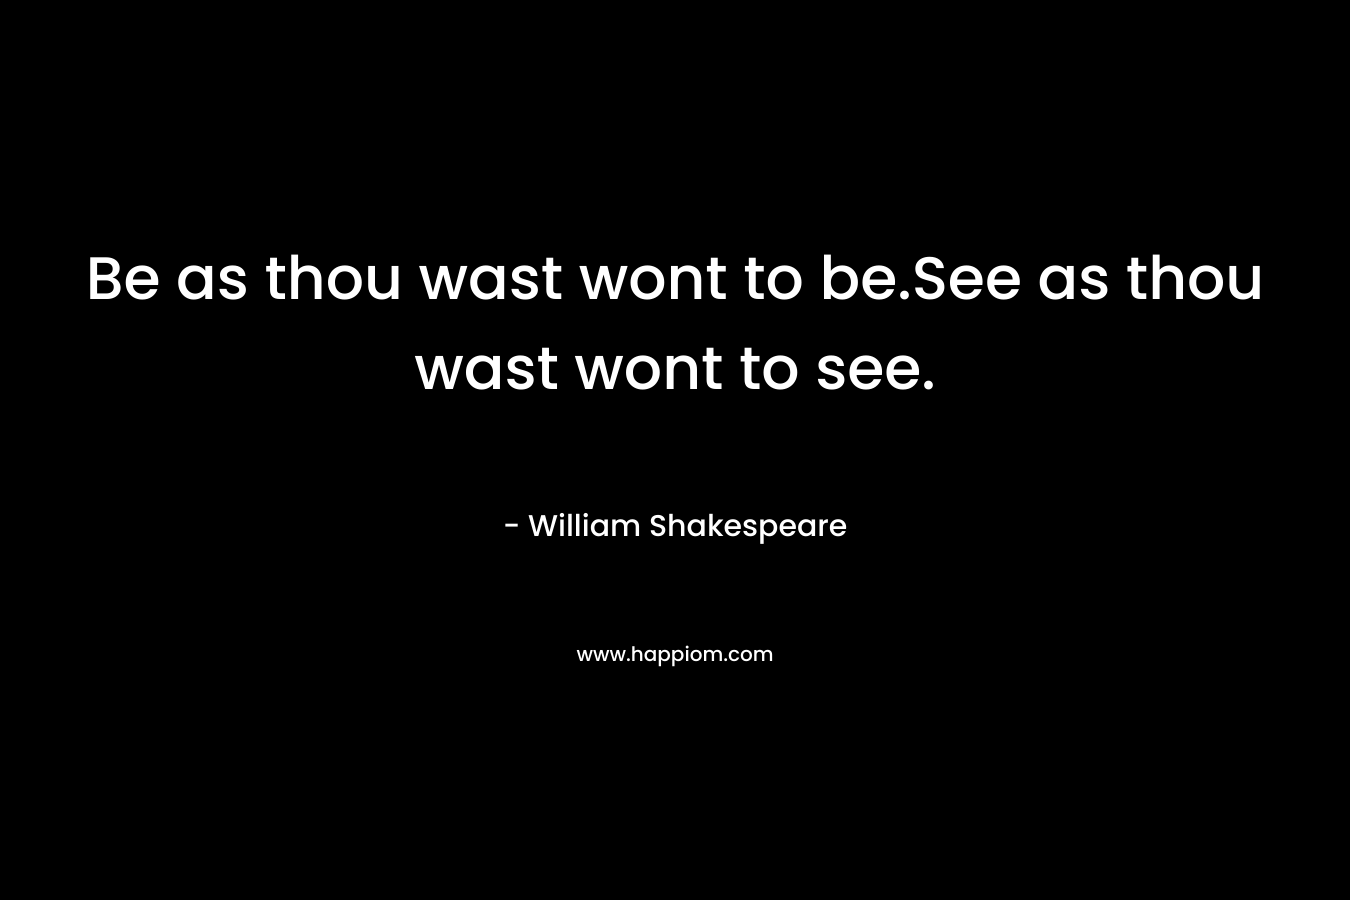 Be as thou wast wont to be.See as thou wast wont to see. – William Shakespeare